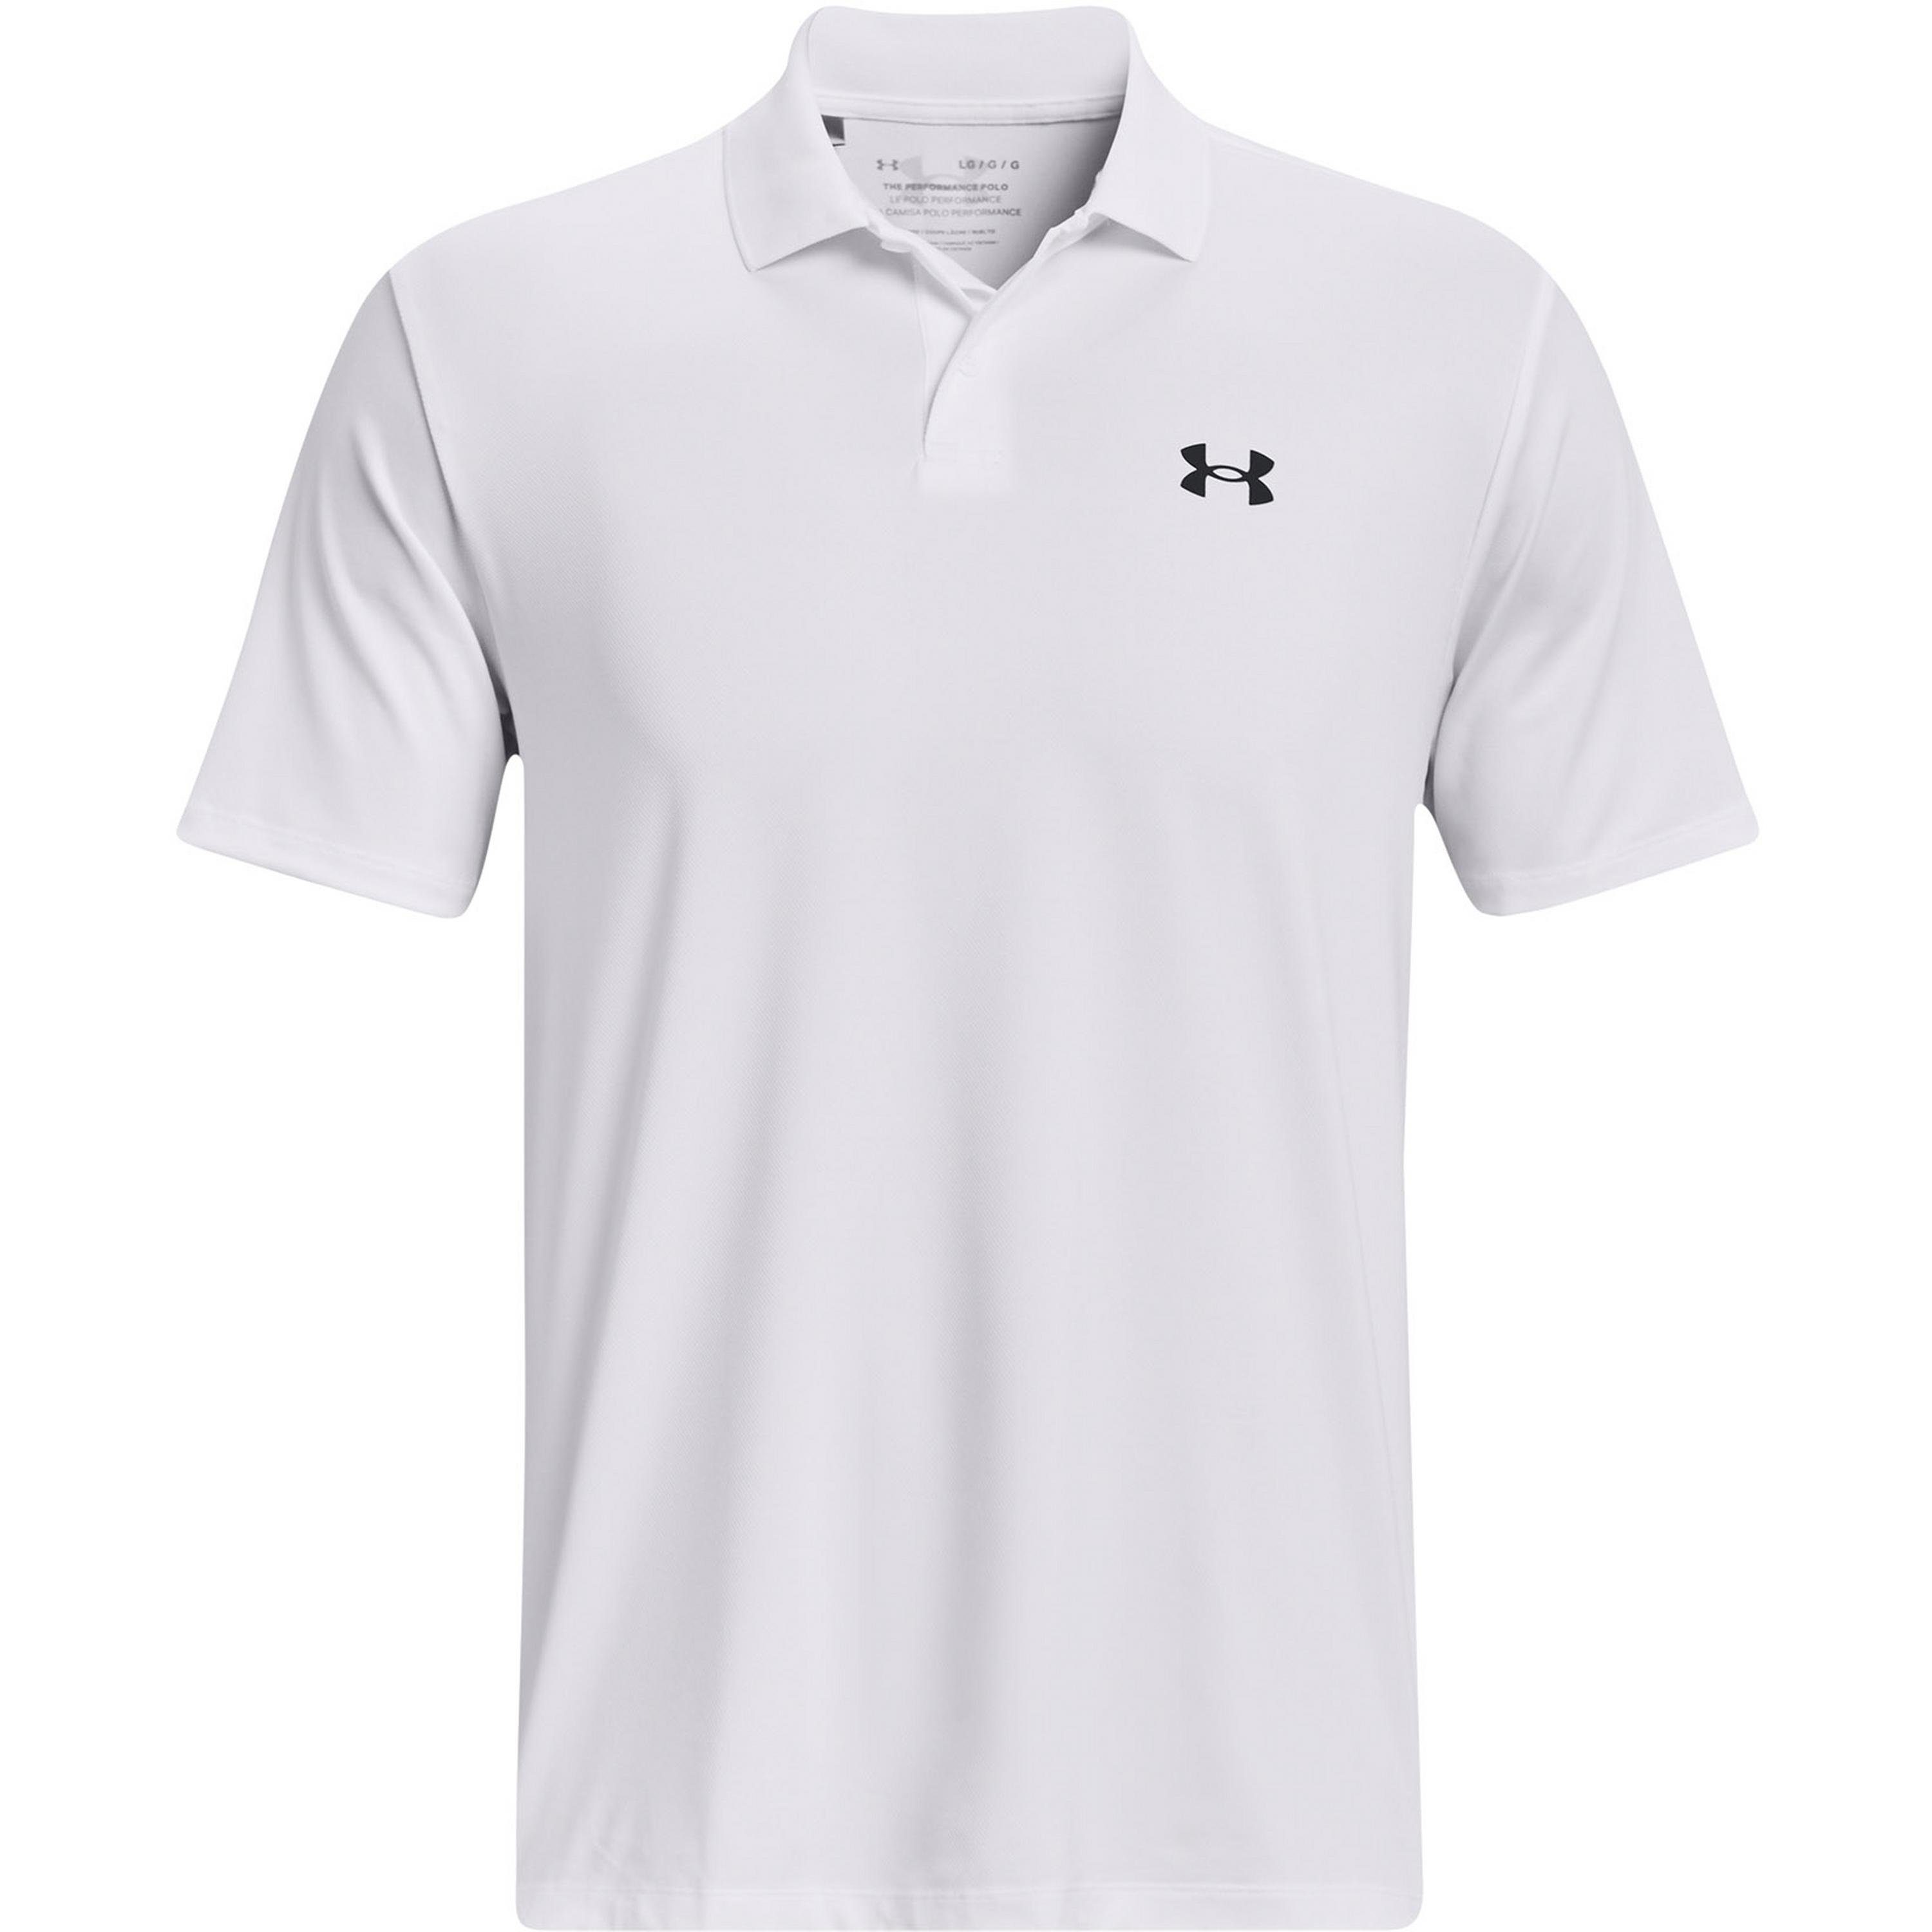 Under Armour® Poloshirt Performance white-pitch gray 3.0